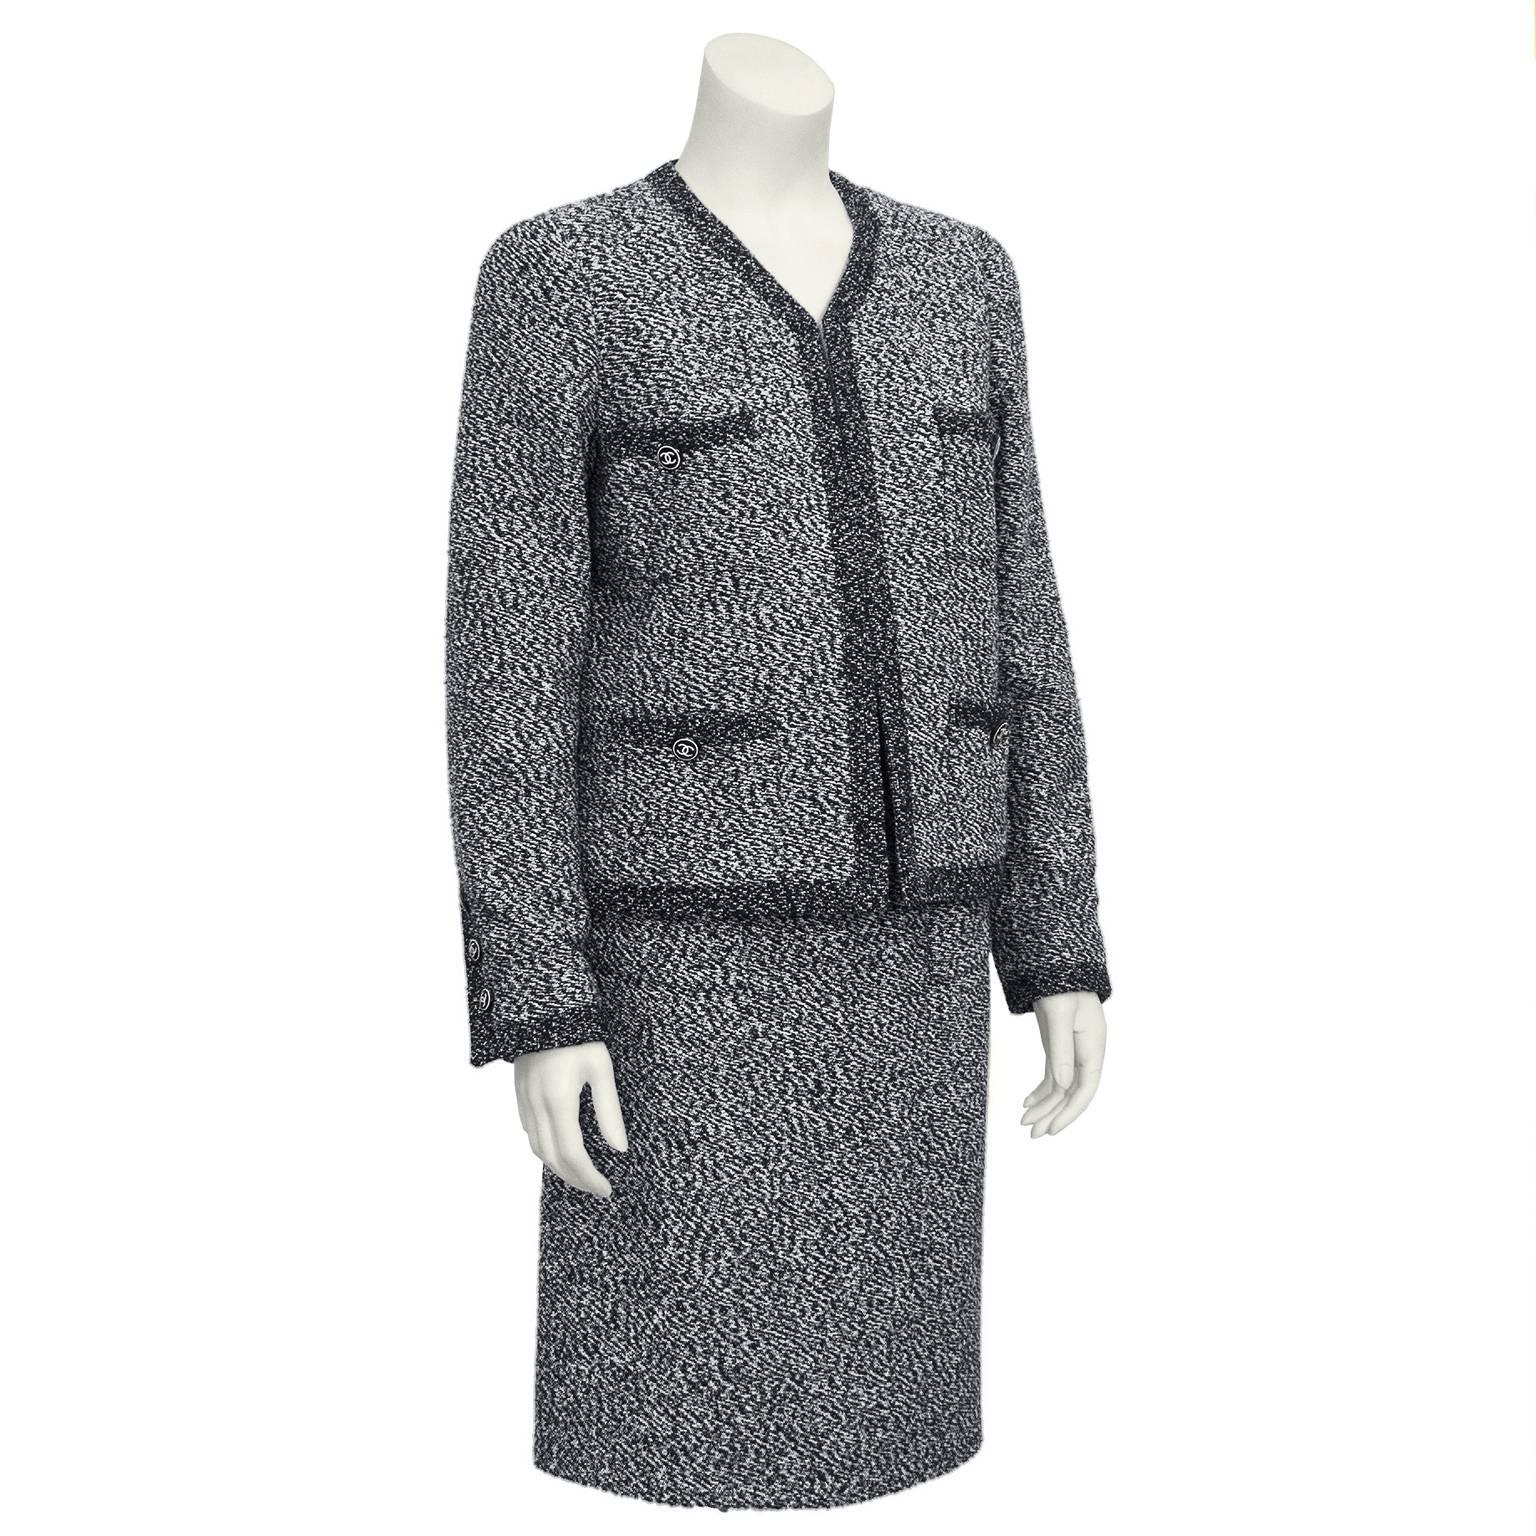 Iconic Chanel graphite tweed bloucle suit from the 1997 collection. Jacket is collarless with a darker trim. Four pockets on front side, each with a button. Three buttons on each wrist. Buttons are black resin with the Chanel CC logo in white. 